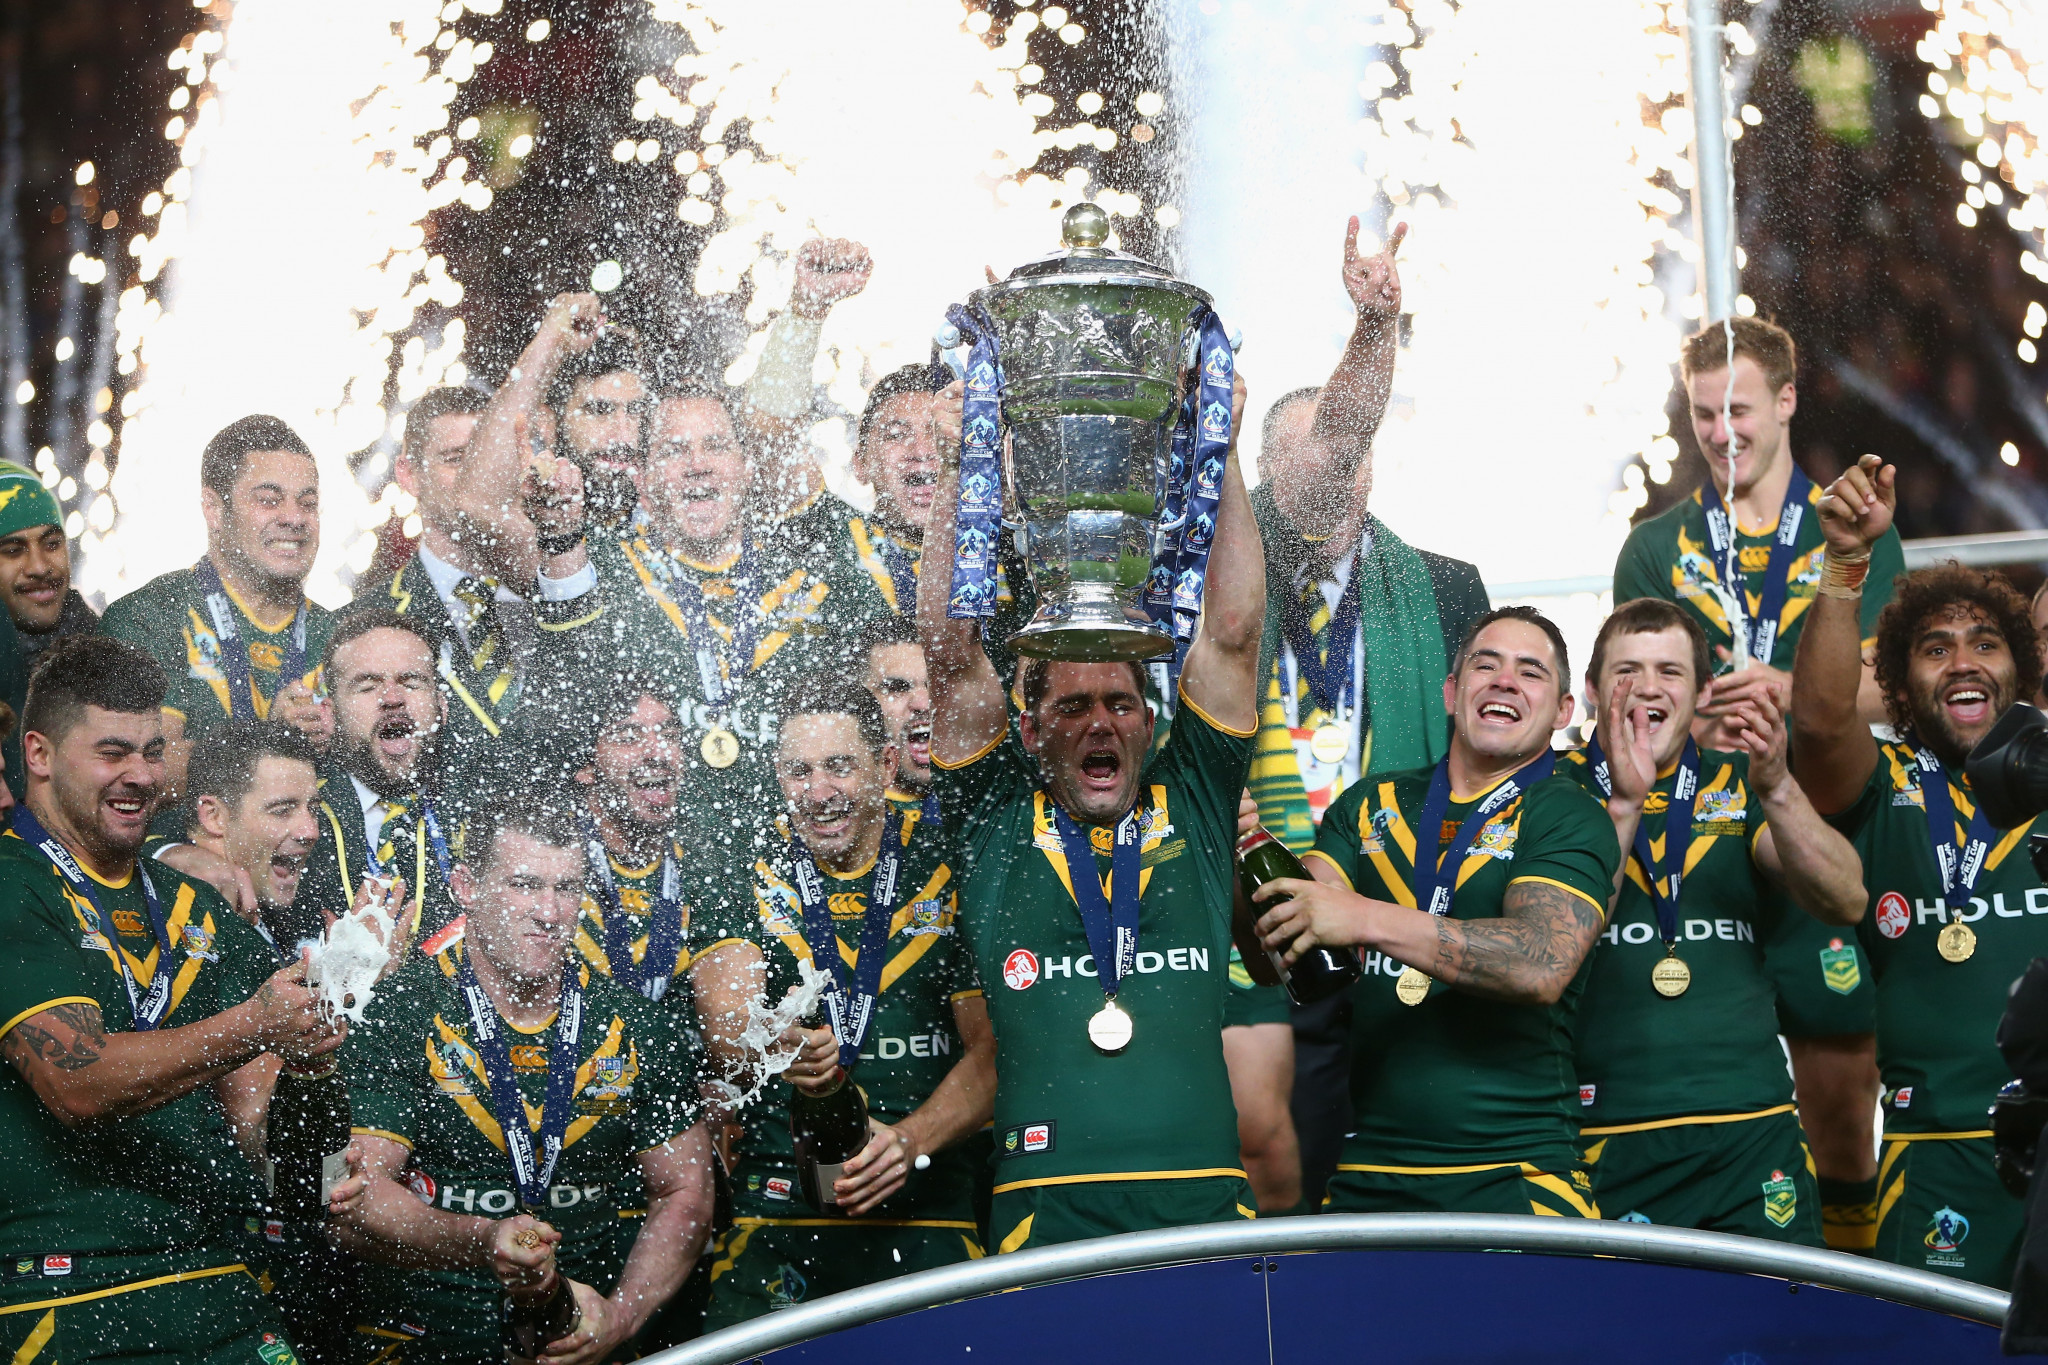 Australia beat New Zealand 34-2 in the final in Manchester in England in 2013 ©Getty Images